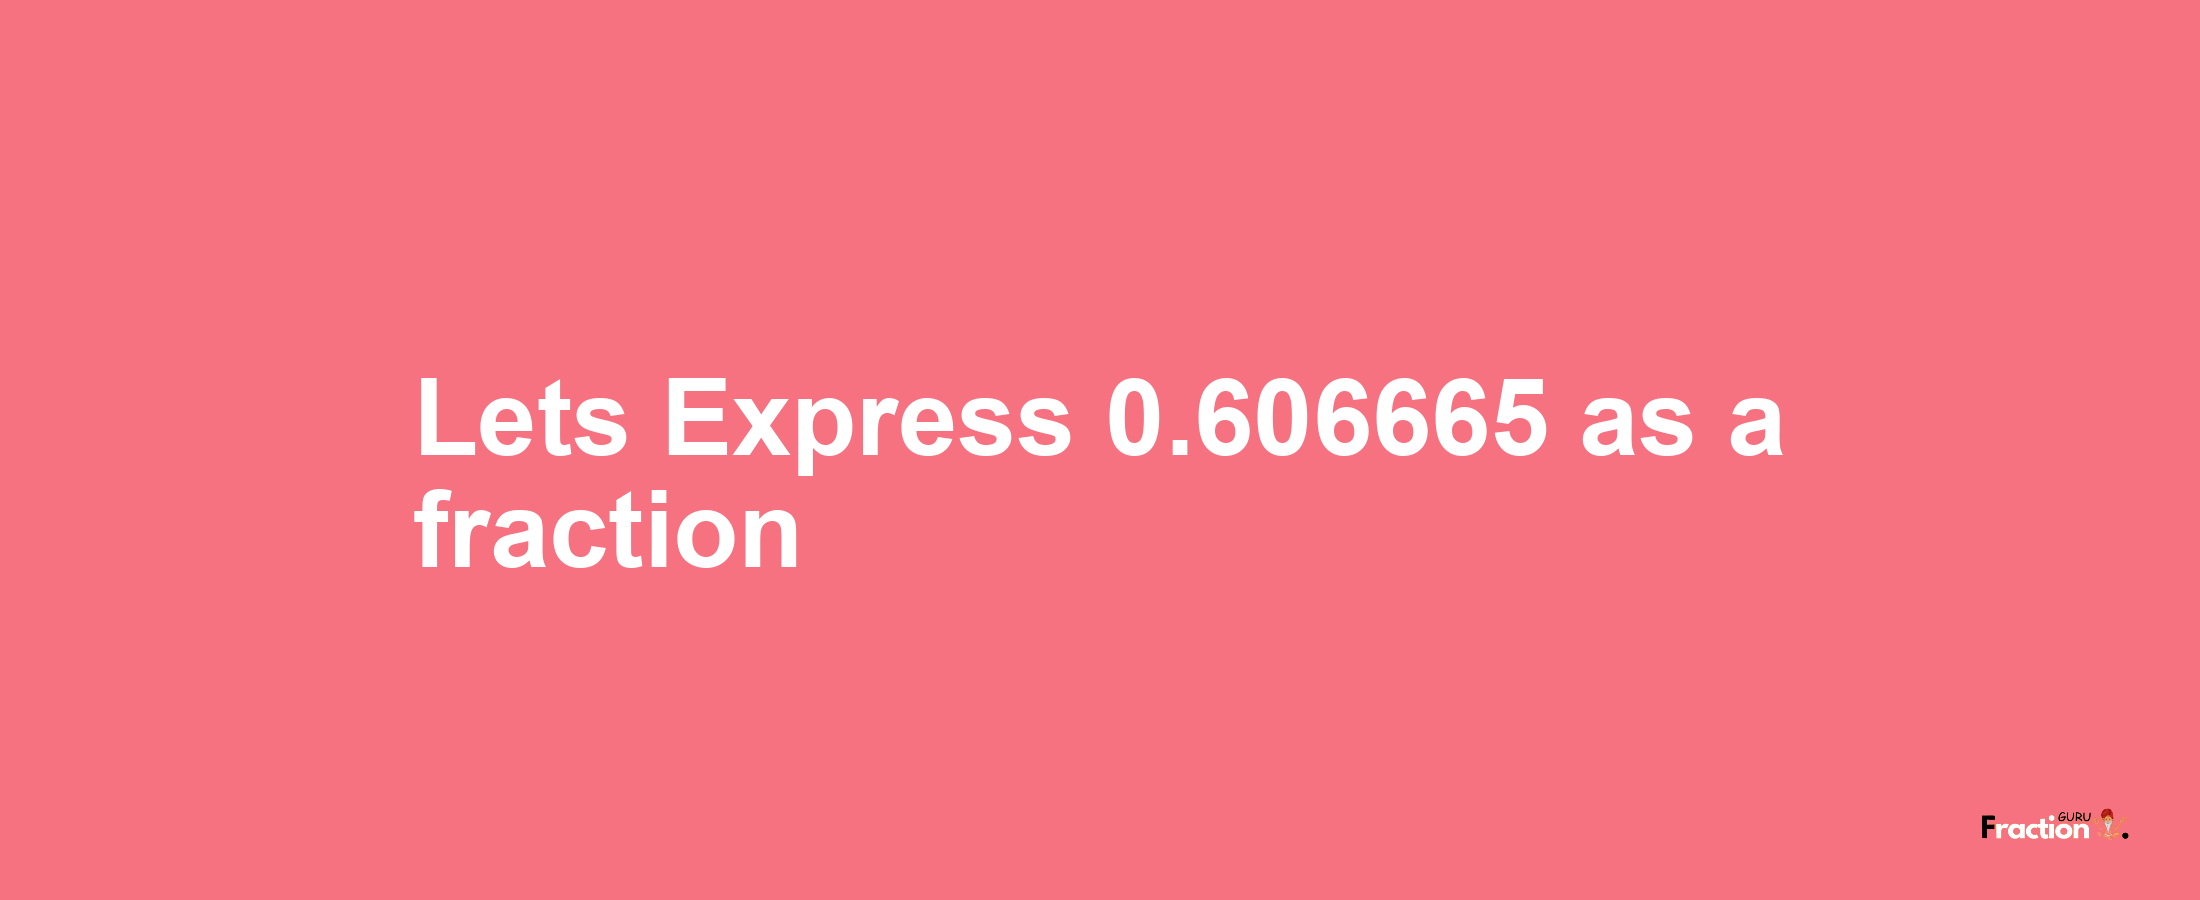 Lets Express 0.606665 as afraction